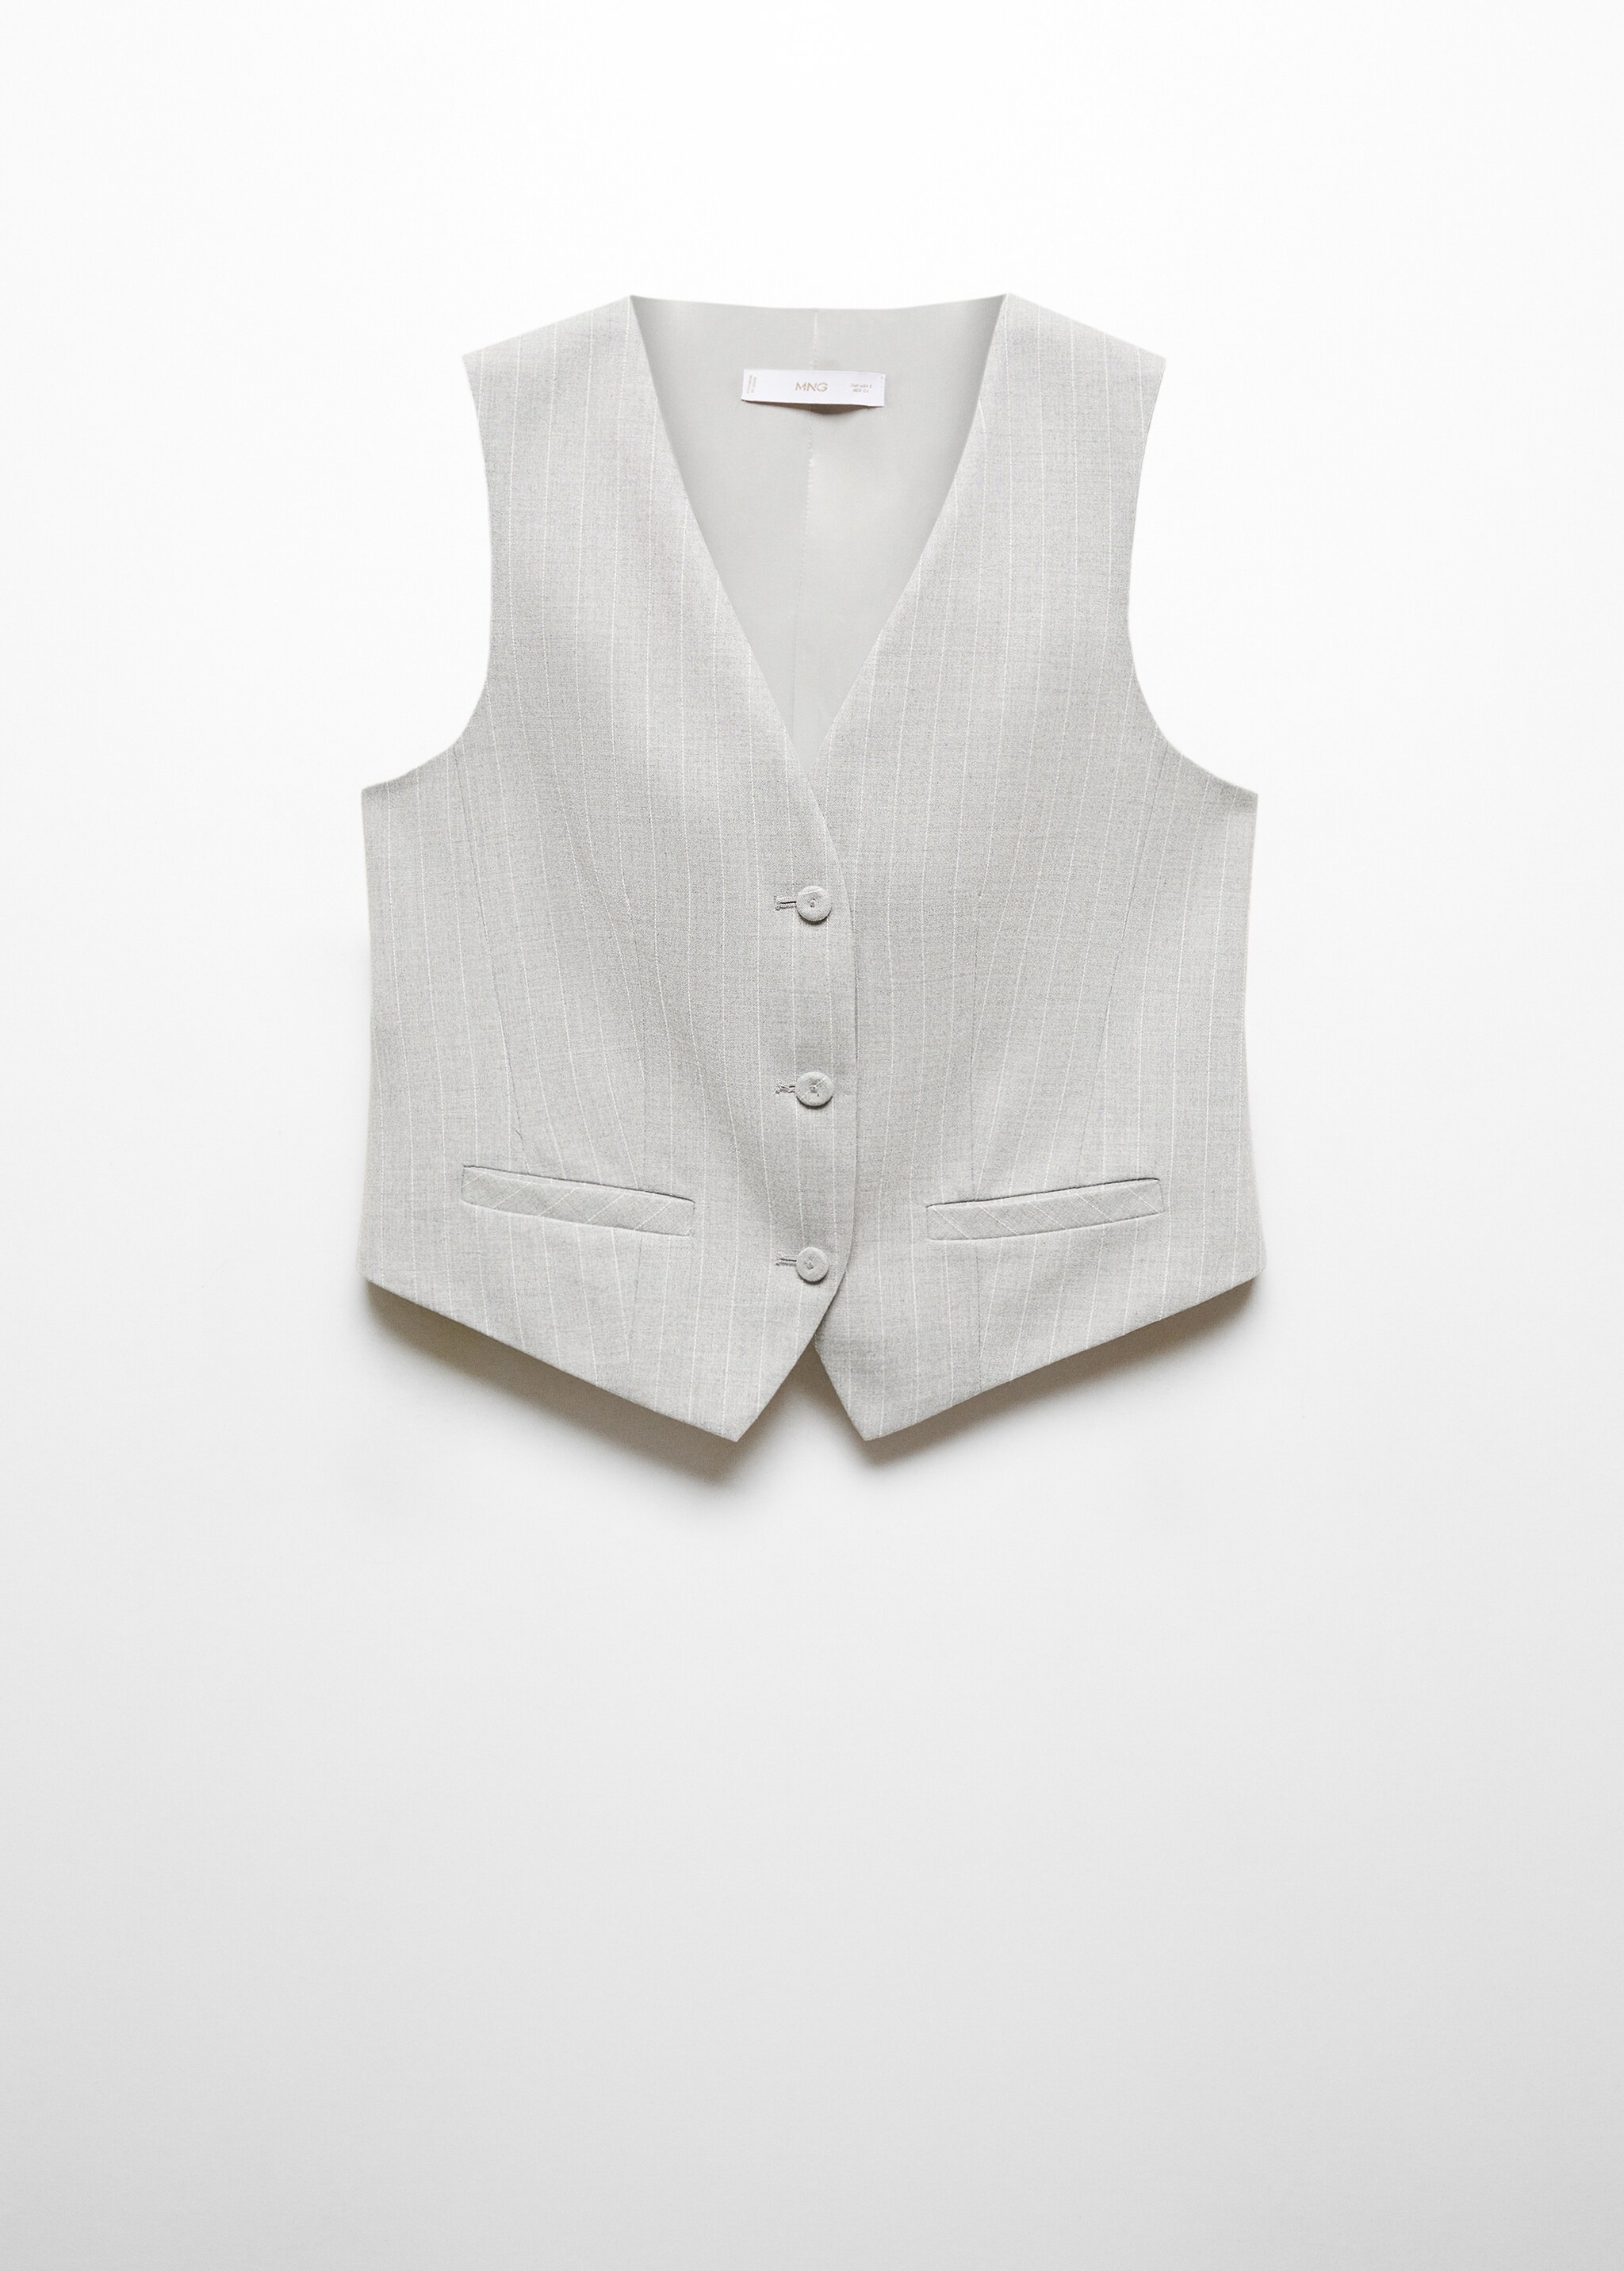 Pinstriped suit waistcoat - Article without model